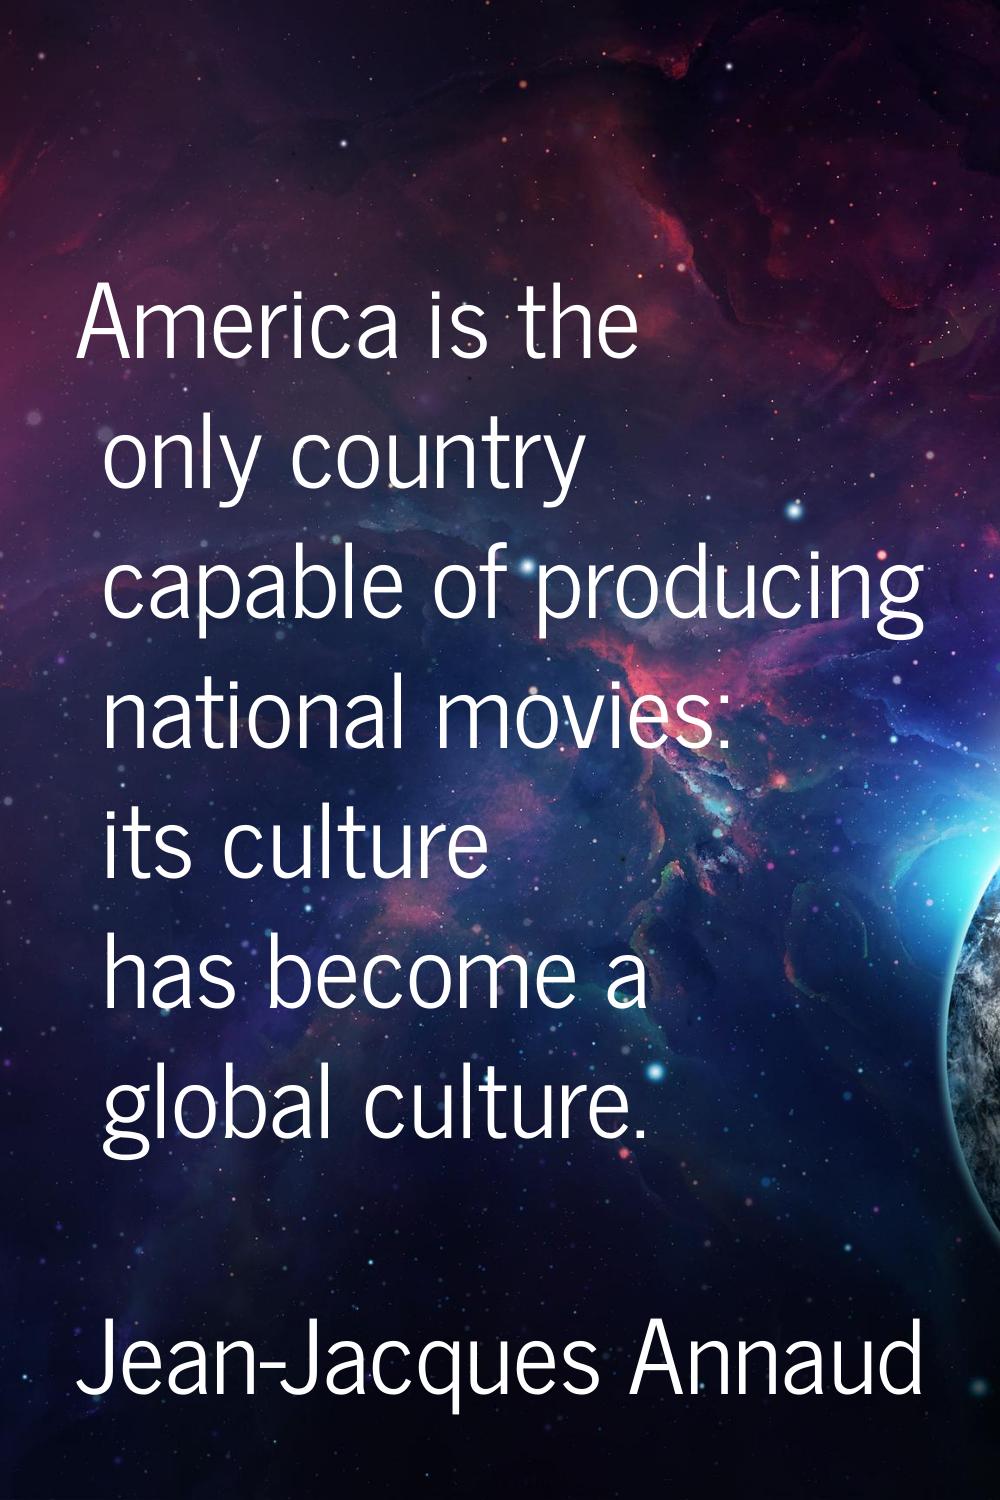 America is the only country capable of producing national movies: its culture has become a global c